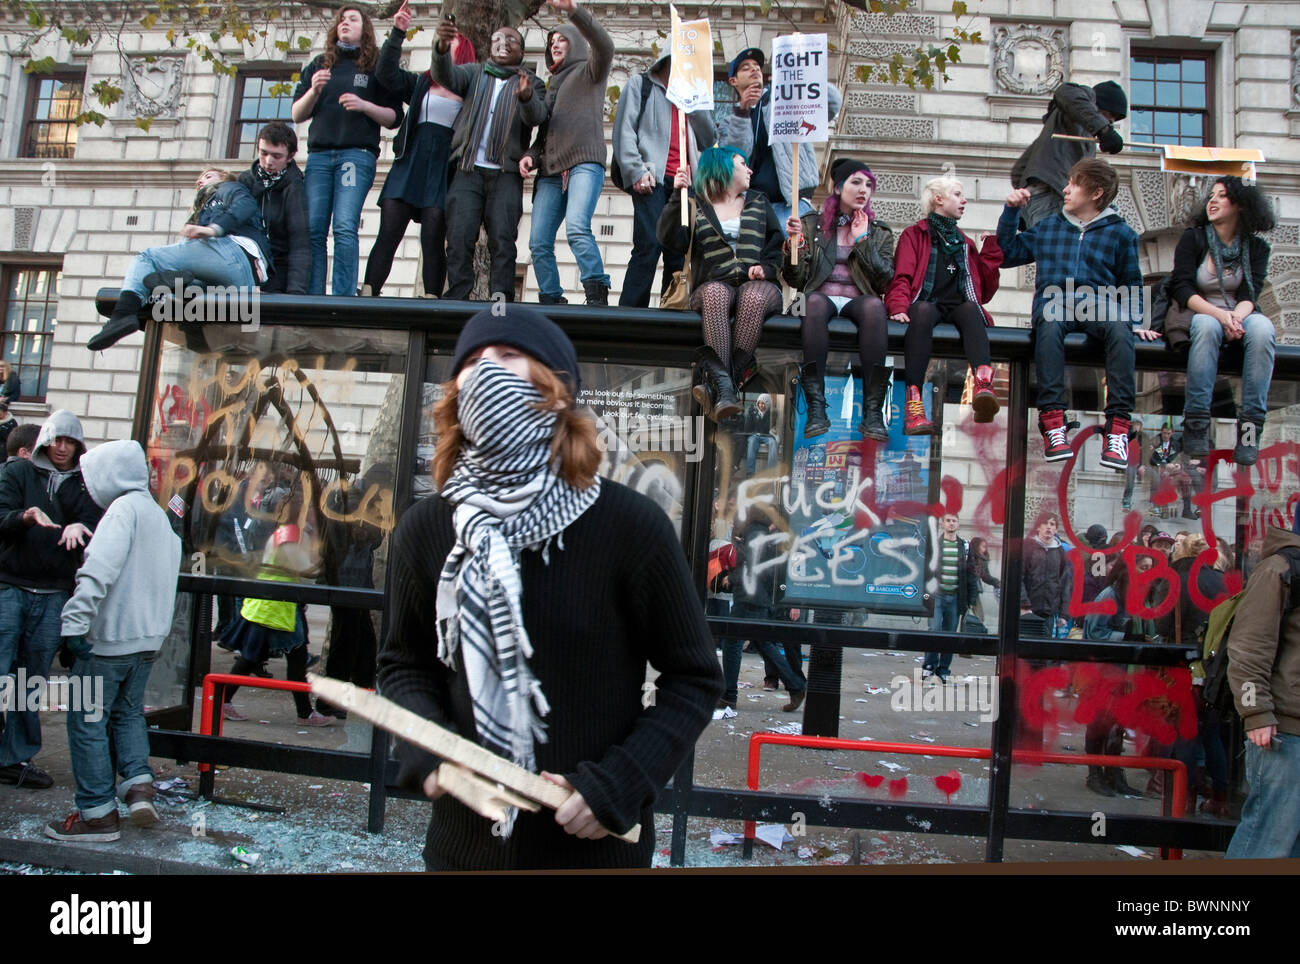 Student Protest about increase in fees ended in violence and police kettling in Whitehall  London 24.11.10 Stock Photo